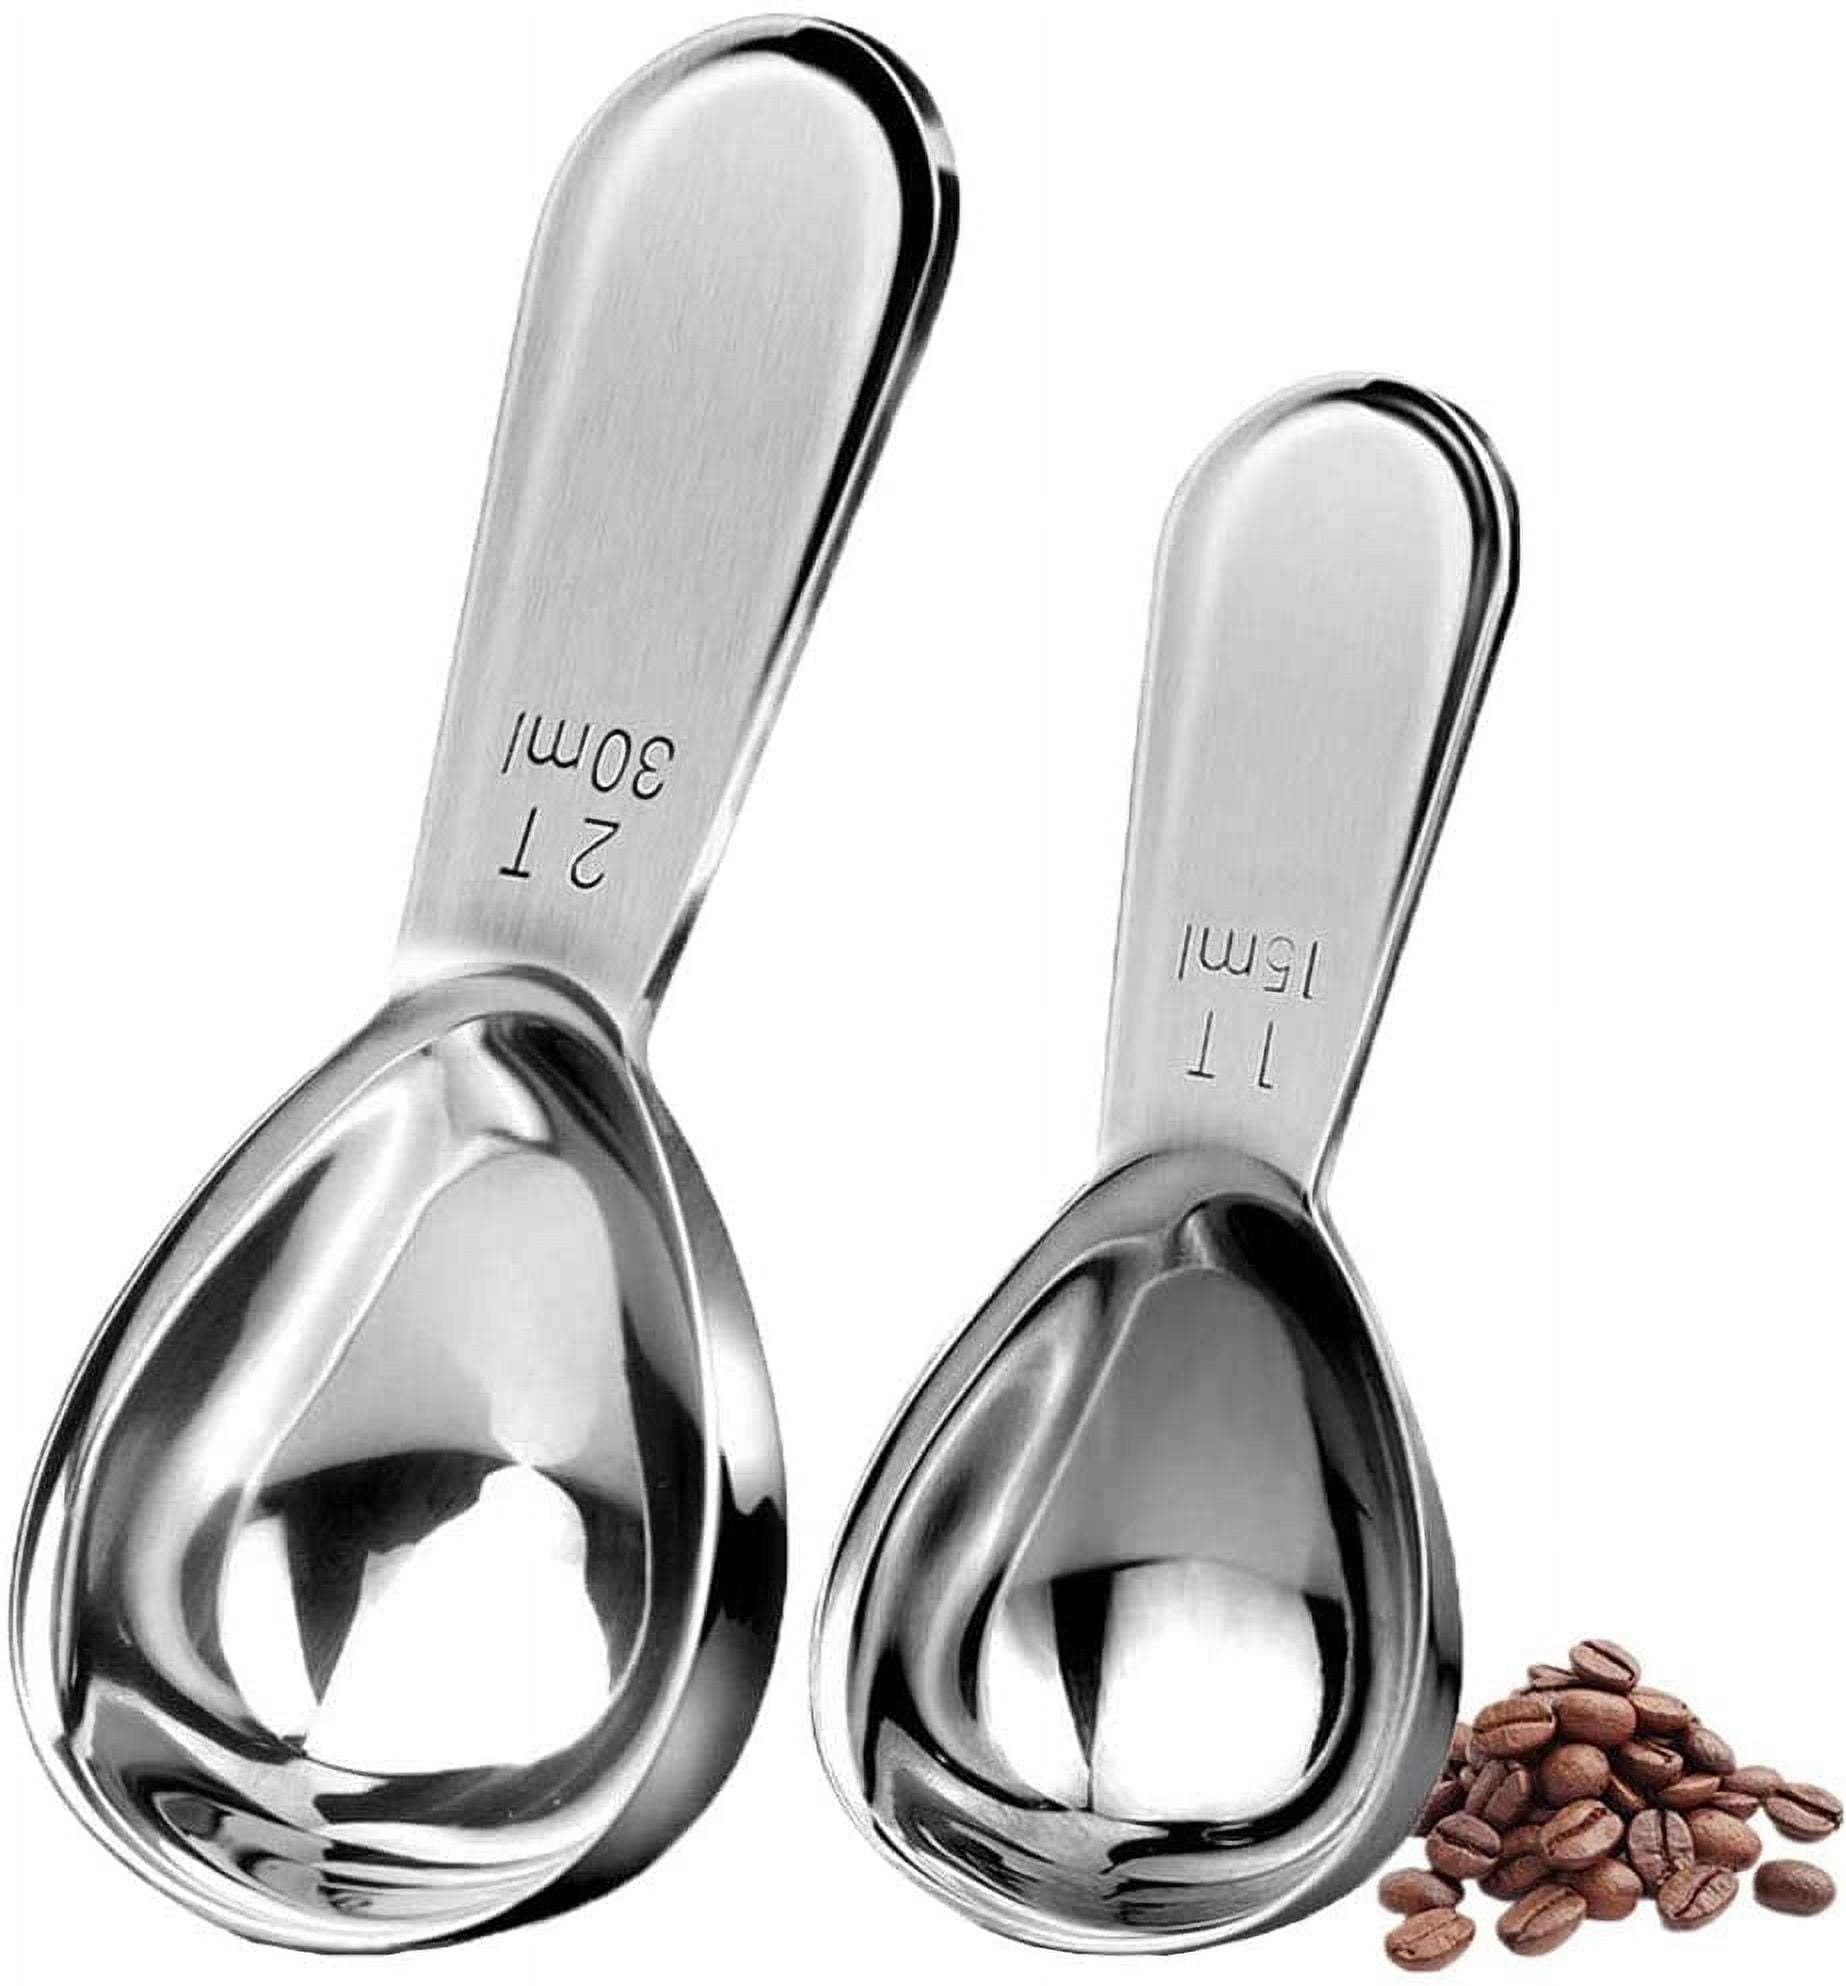 Set of 2 Measuring Spoons - Long Handle Teaspoon (5 ml) and Tablespoon (15  ml) Bowl Scoops for Coffee, Protein Powder and other Dry/Liquid Goods -  Food Grade BPA Free (Long Handle) 